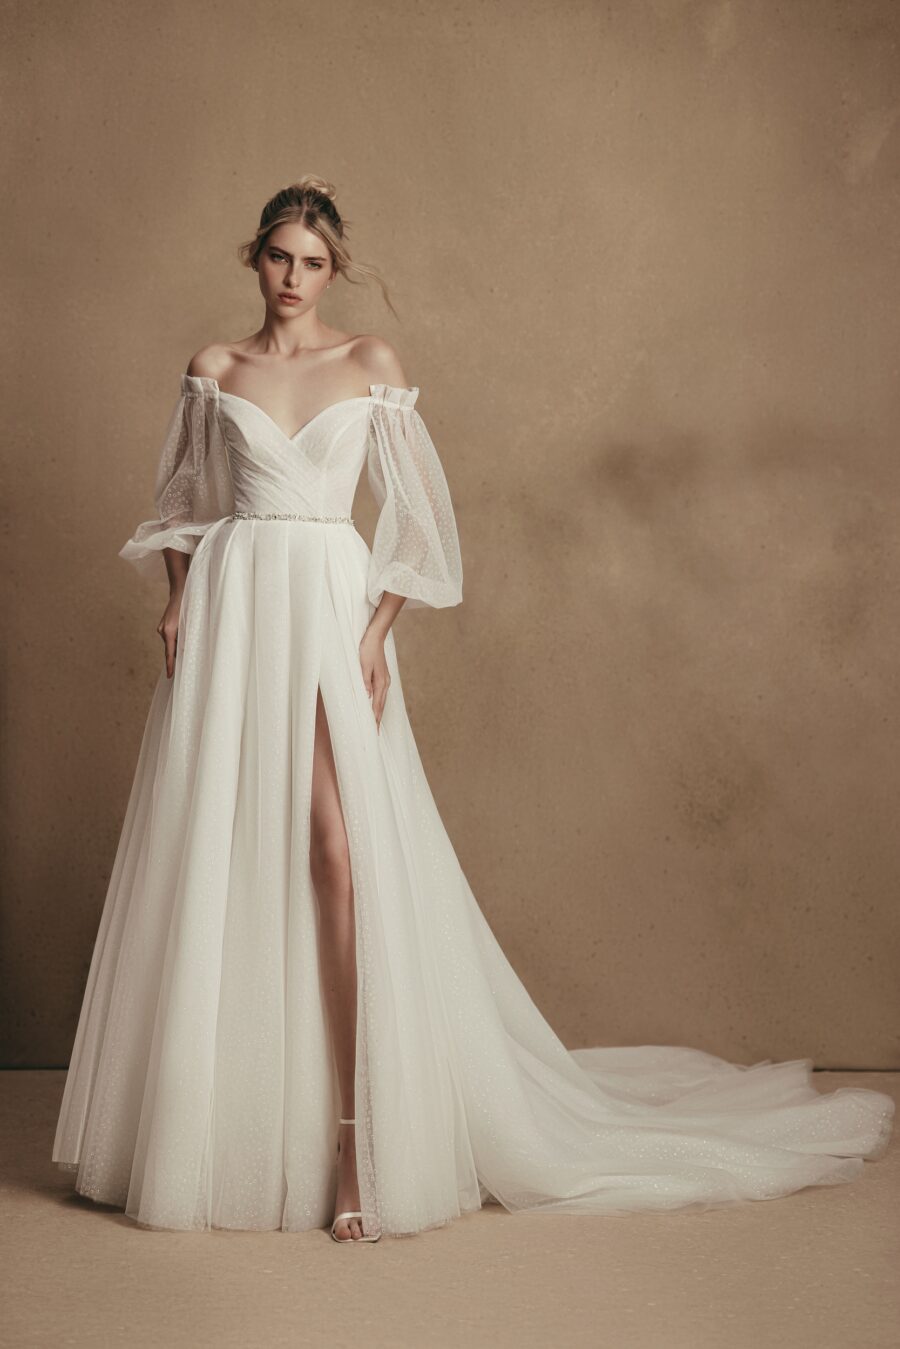 Millie 1 wedding dress by woná concept from personality collection